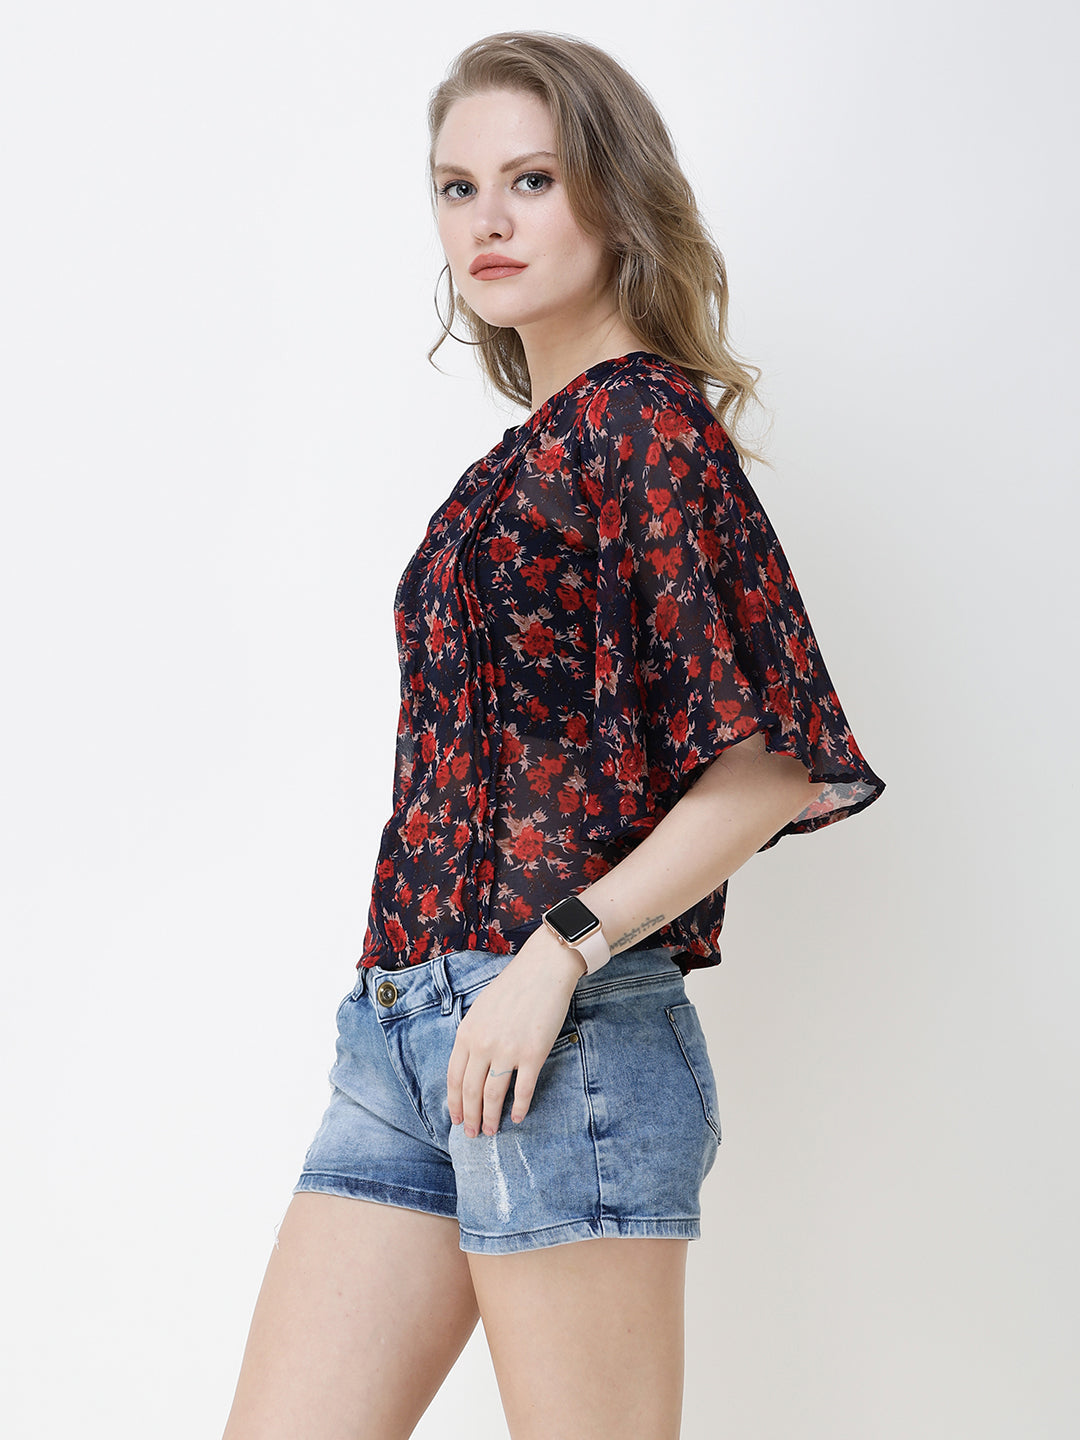 SCORPIUS Women Navy Blue & Red Floral Printed Top